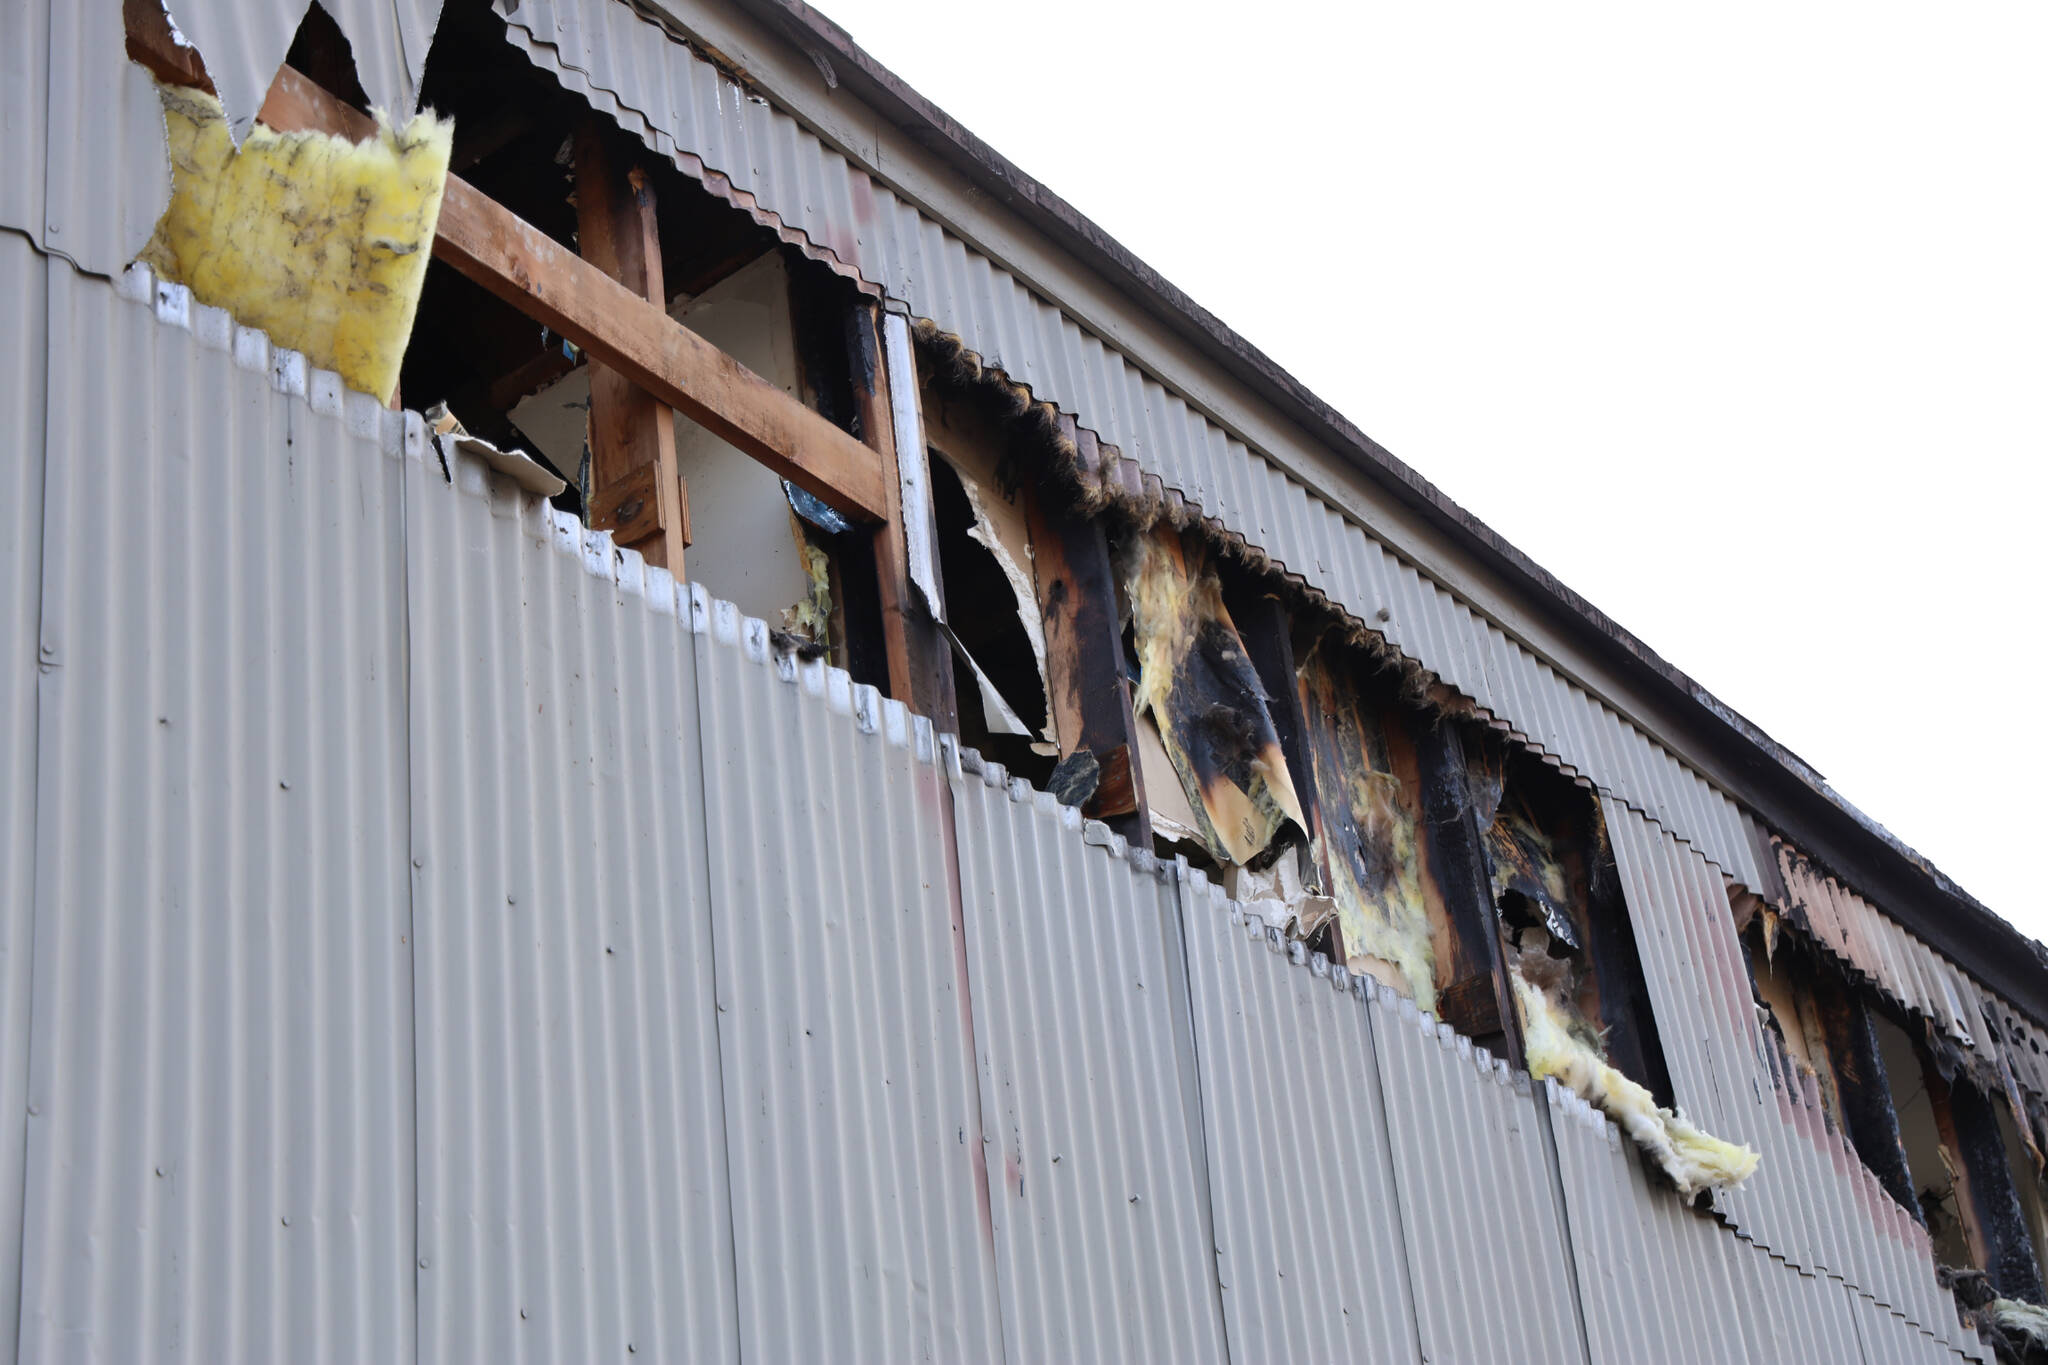 Burnt pieces of insulation can be seen falling from a privately owned airport hangar at the Juneau International Airport after Capital City Fire/Rescue extinguished a fire in the building Thursday morning. (Clarise Larson / Juneau Empire)